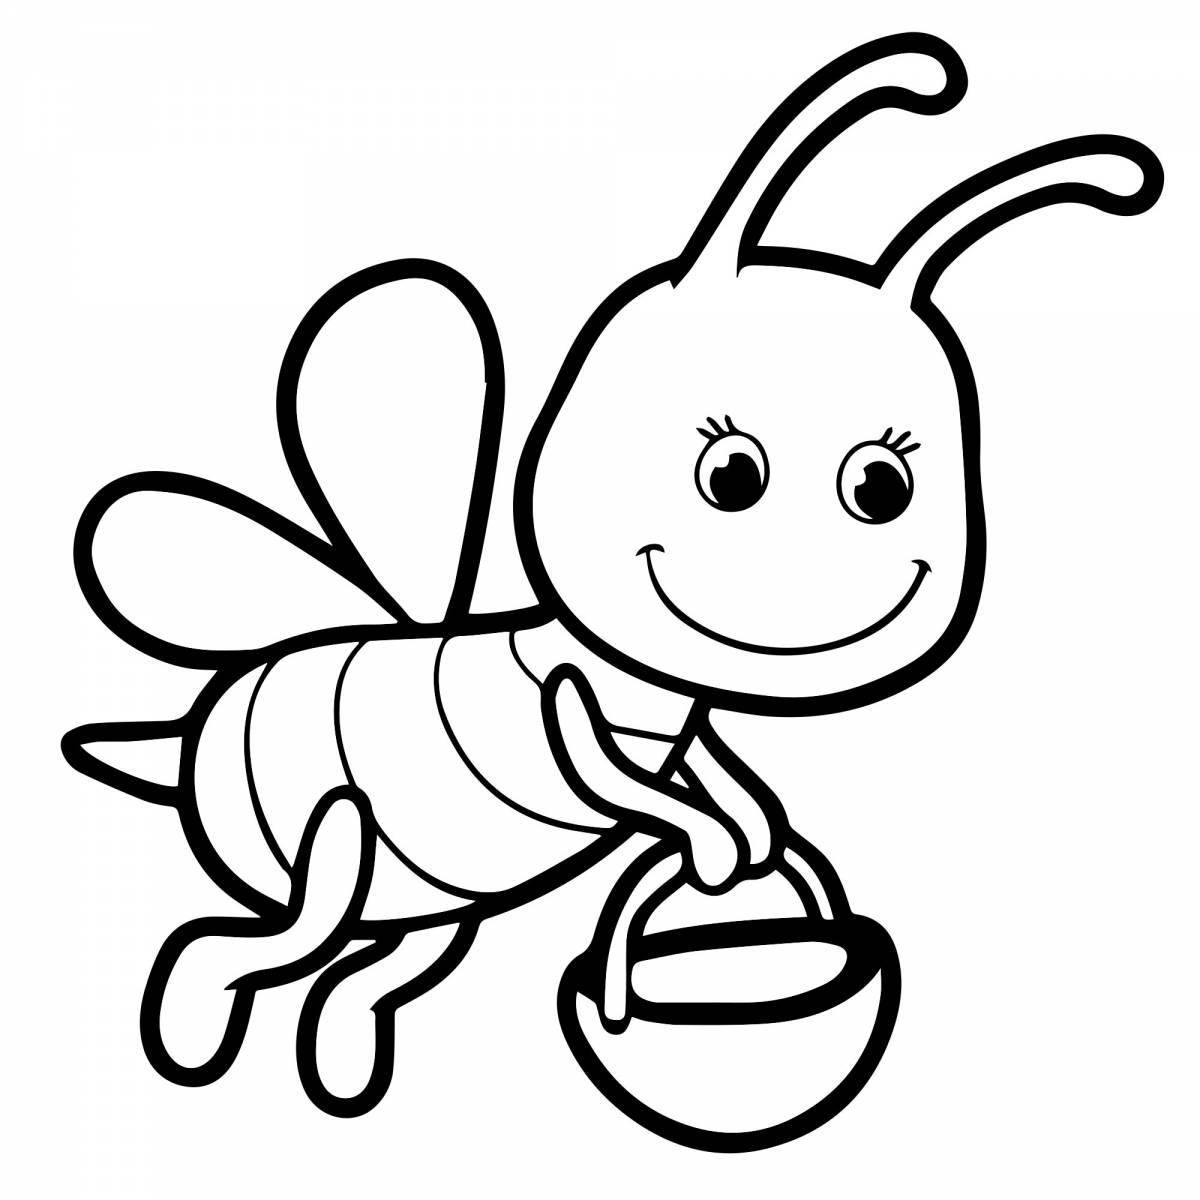 Coloring book nice bee for children 3-4 years old